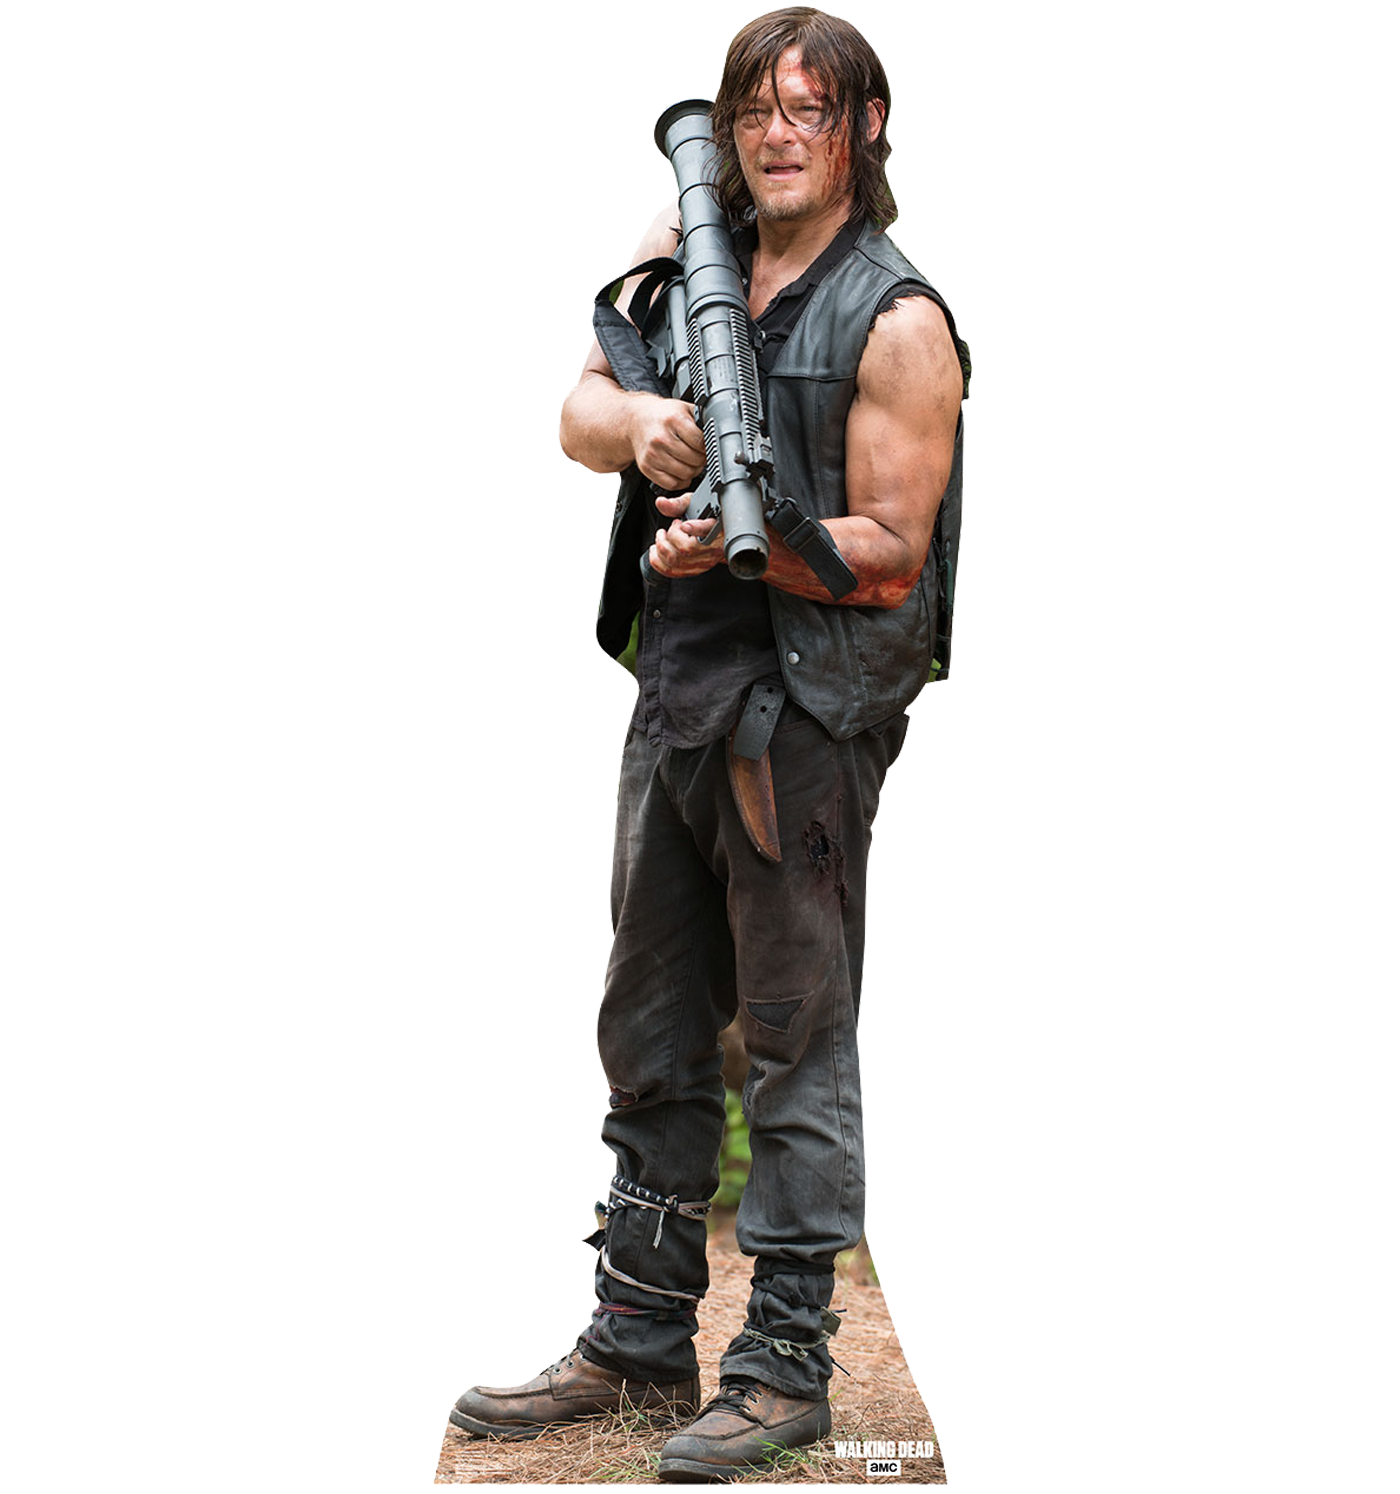 The Walking Dead Daryl with Rocket Launcher Cardboard Cut Out Standee